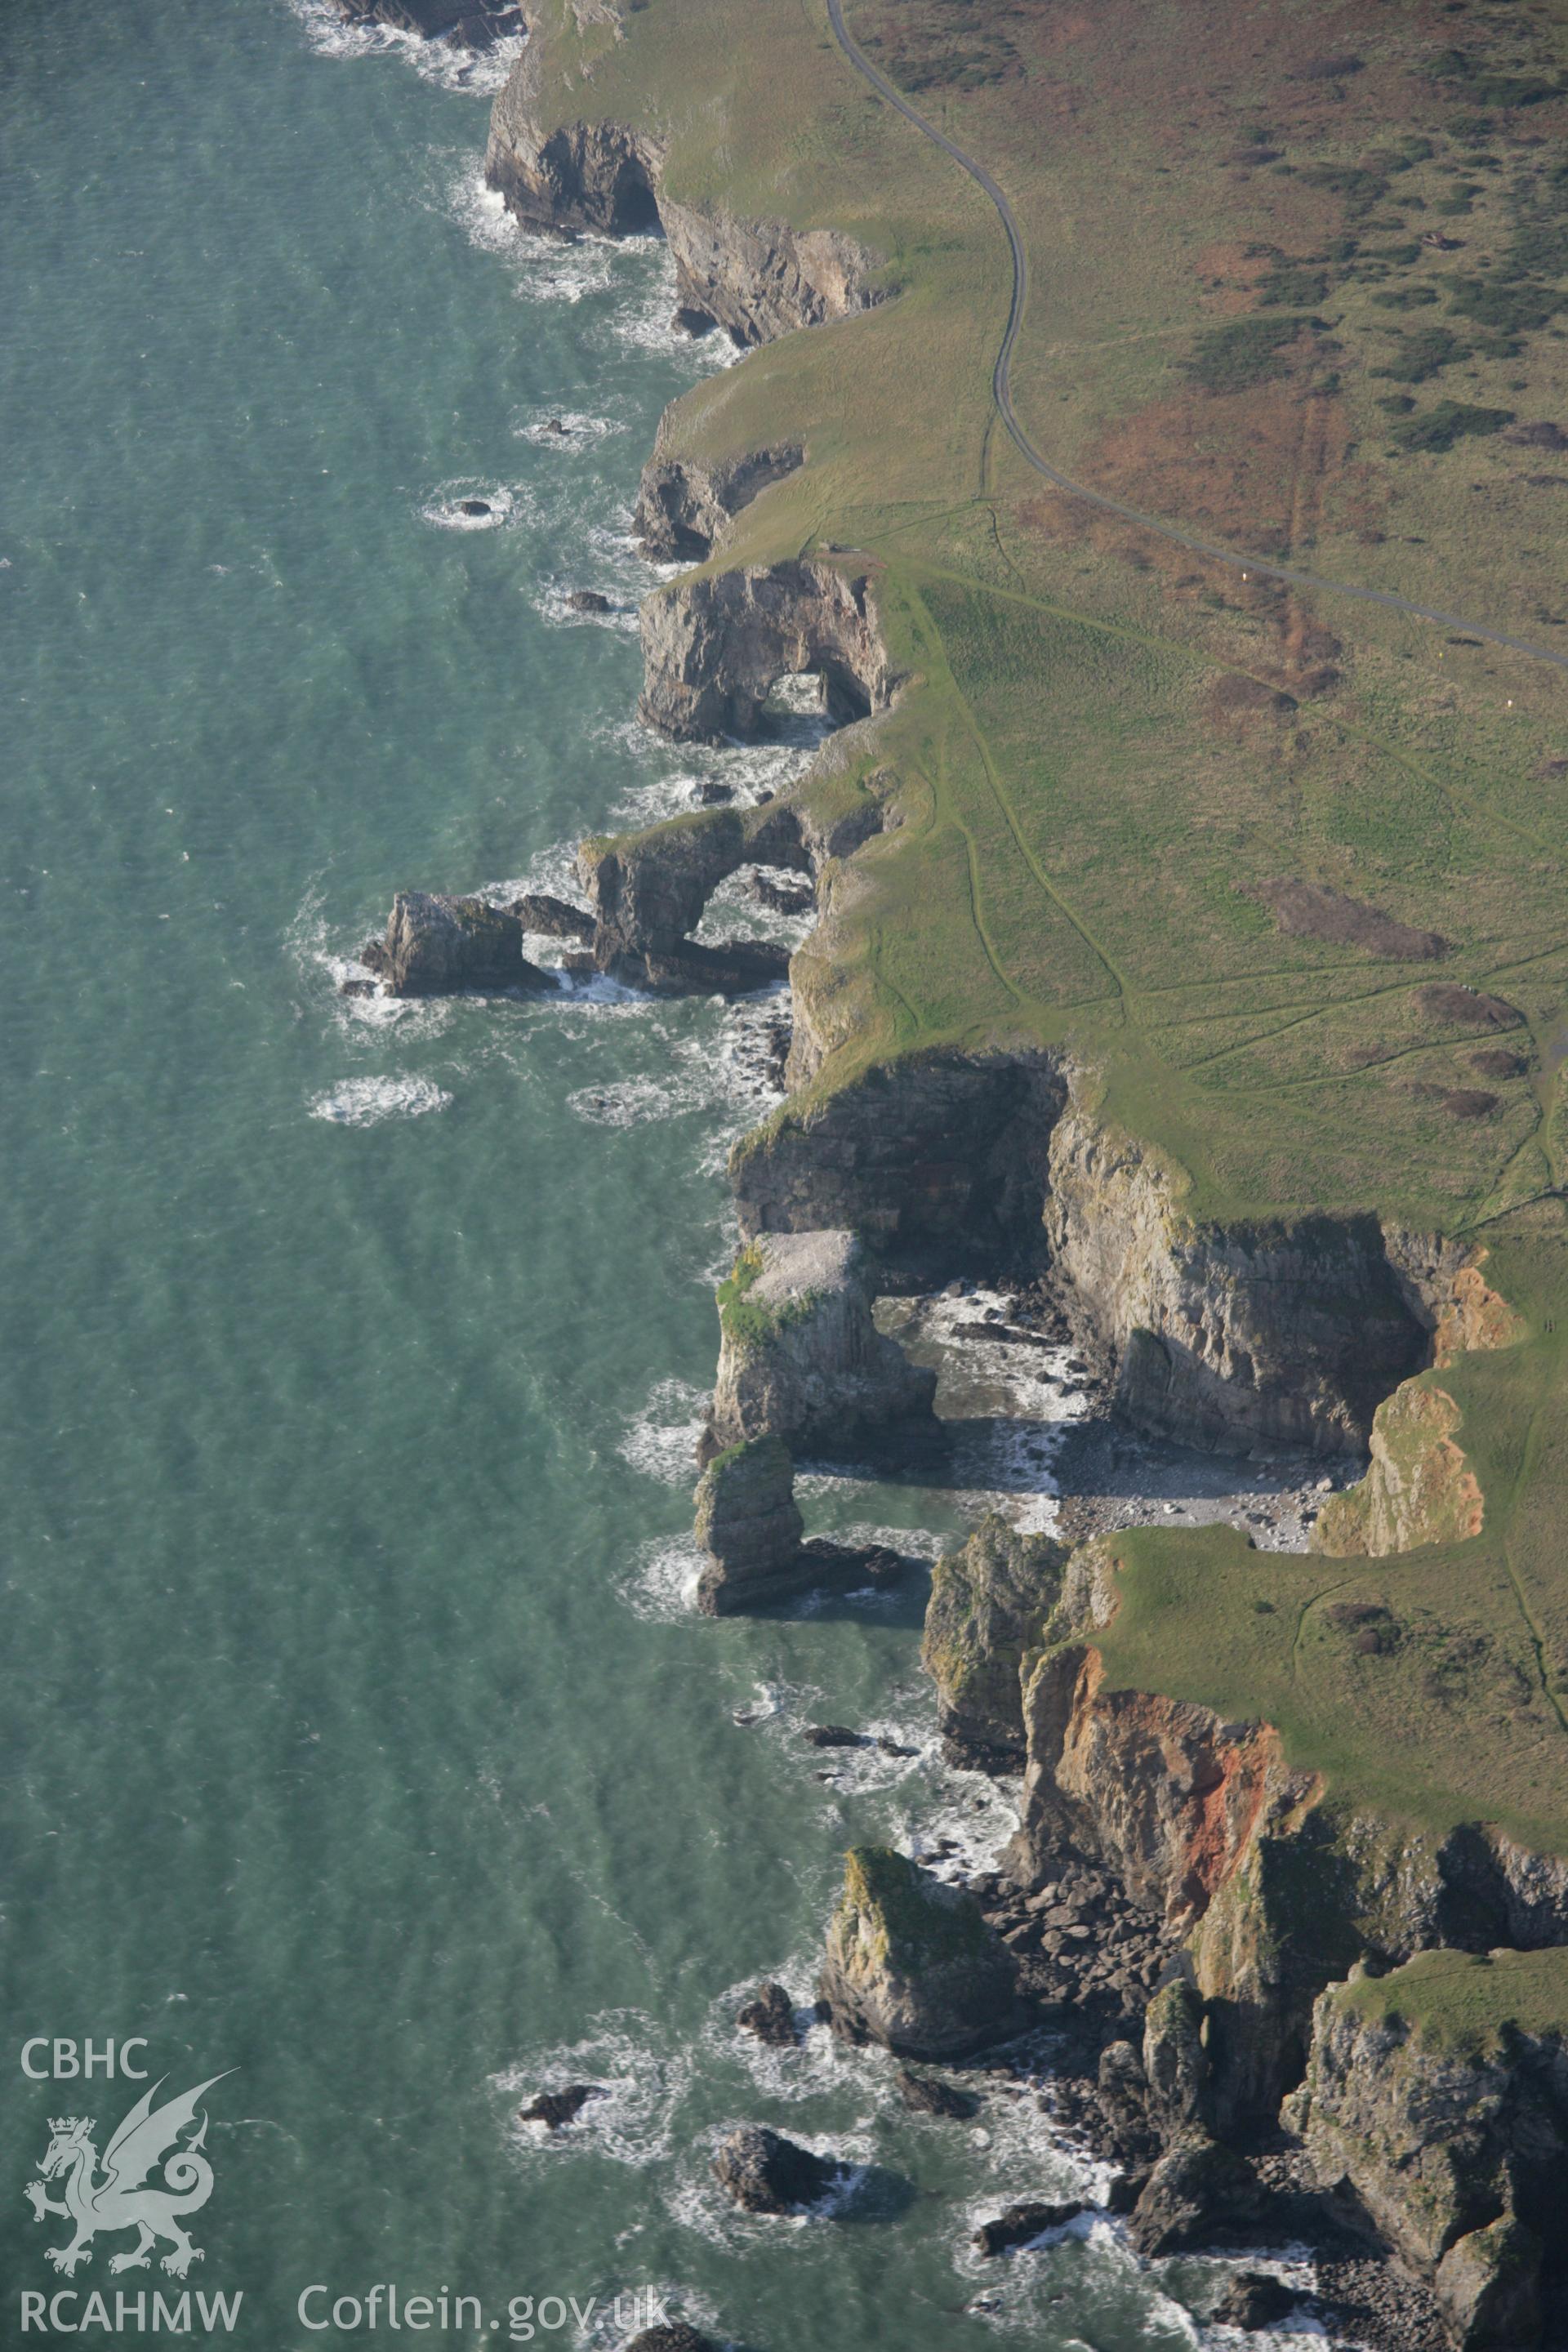 RCAHMW colour oblique aerial photograph of the Green Bridge (of Wales) and Elegug Stacks from the east. Taken on 19 November 2005 by Toby Driver